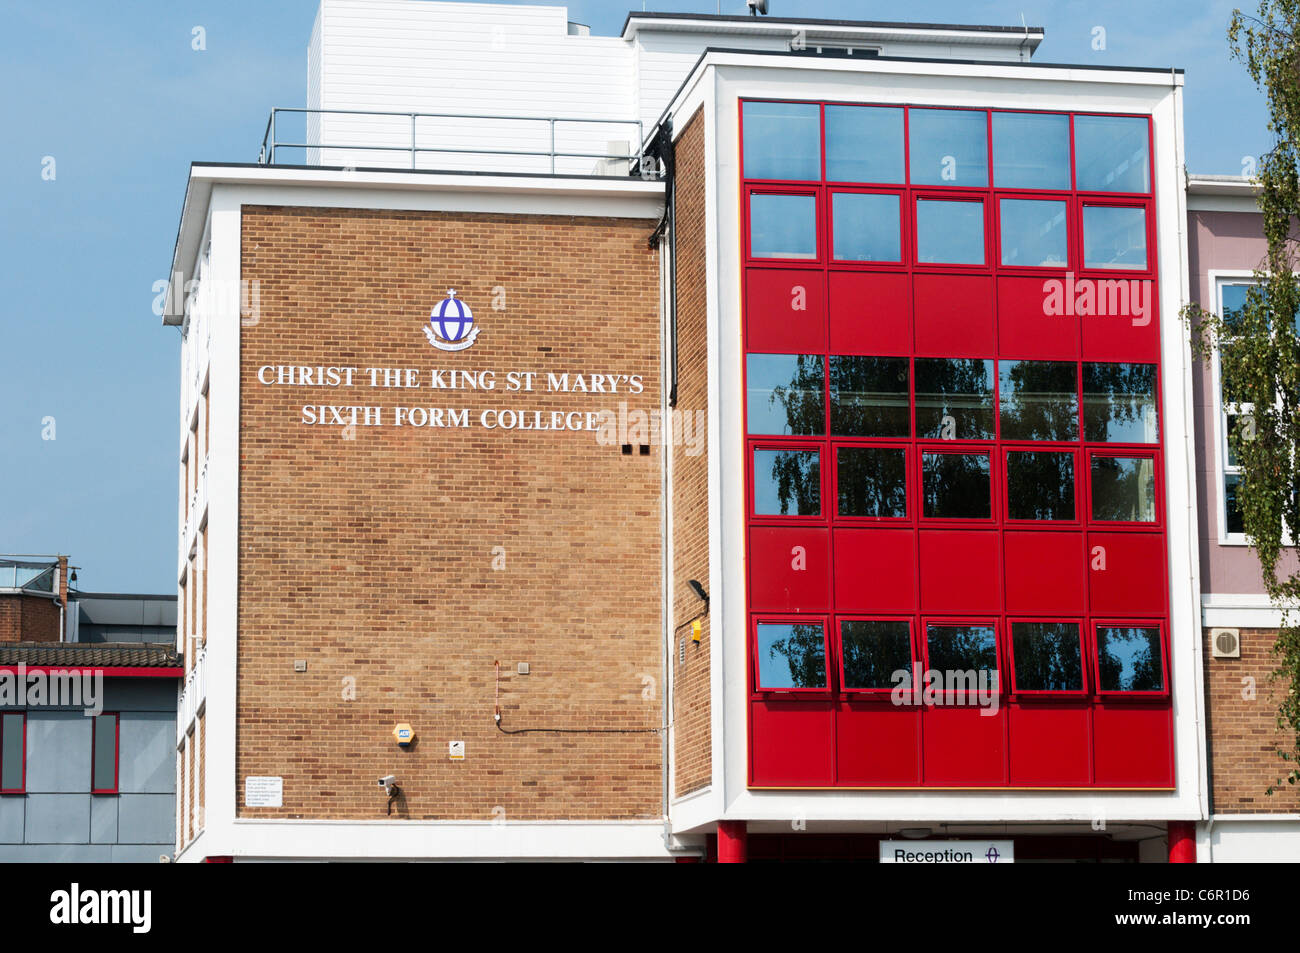 Christ The King St Mary's Sixth Form College at Sidcup in Kent. Stock Photo